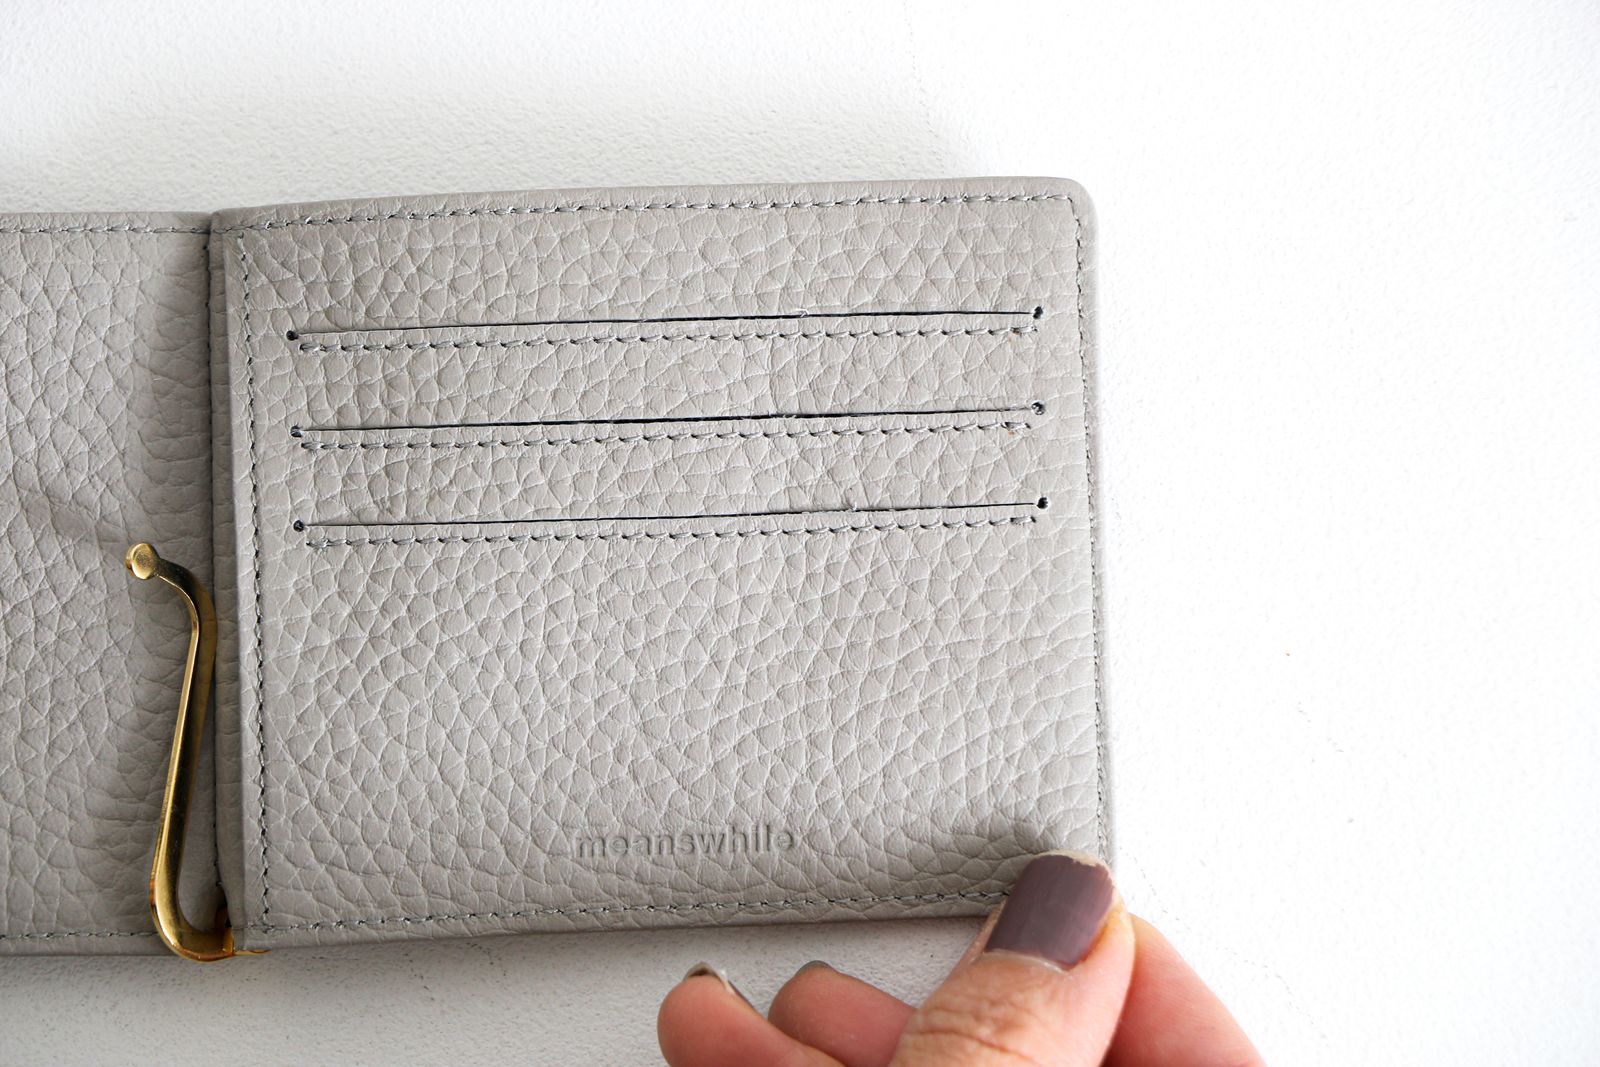 meanswhile - LEATHER MONEY CLIP (LIGHT GREY) / マネークリップ 